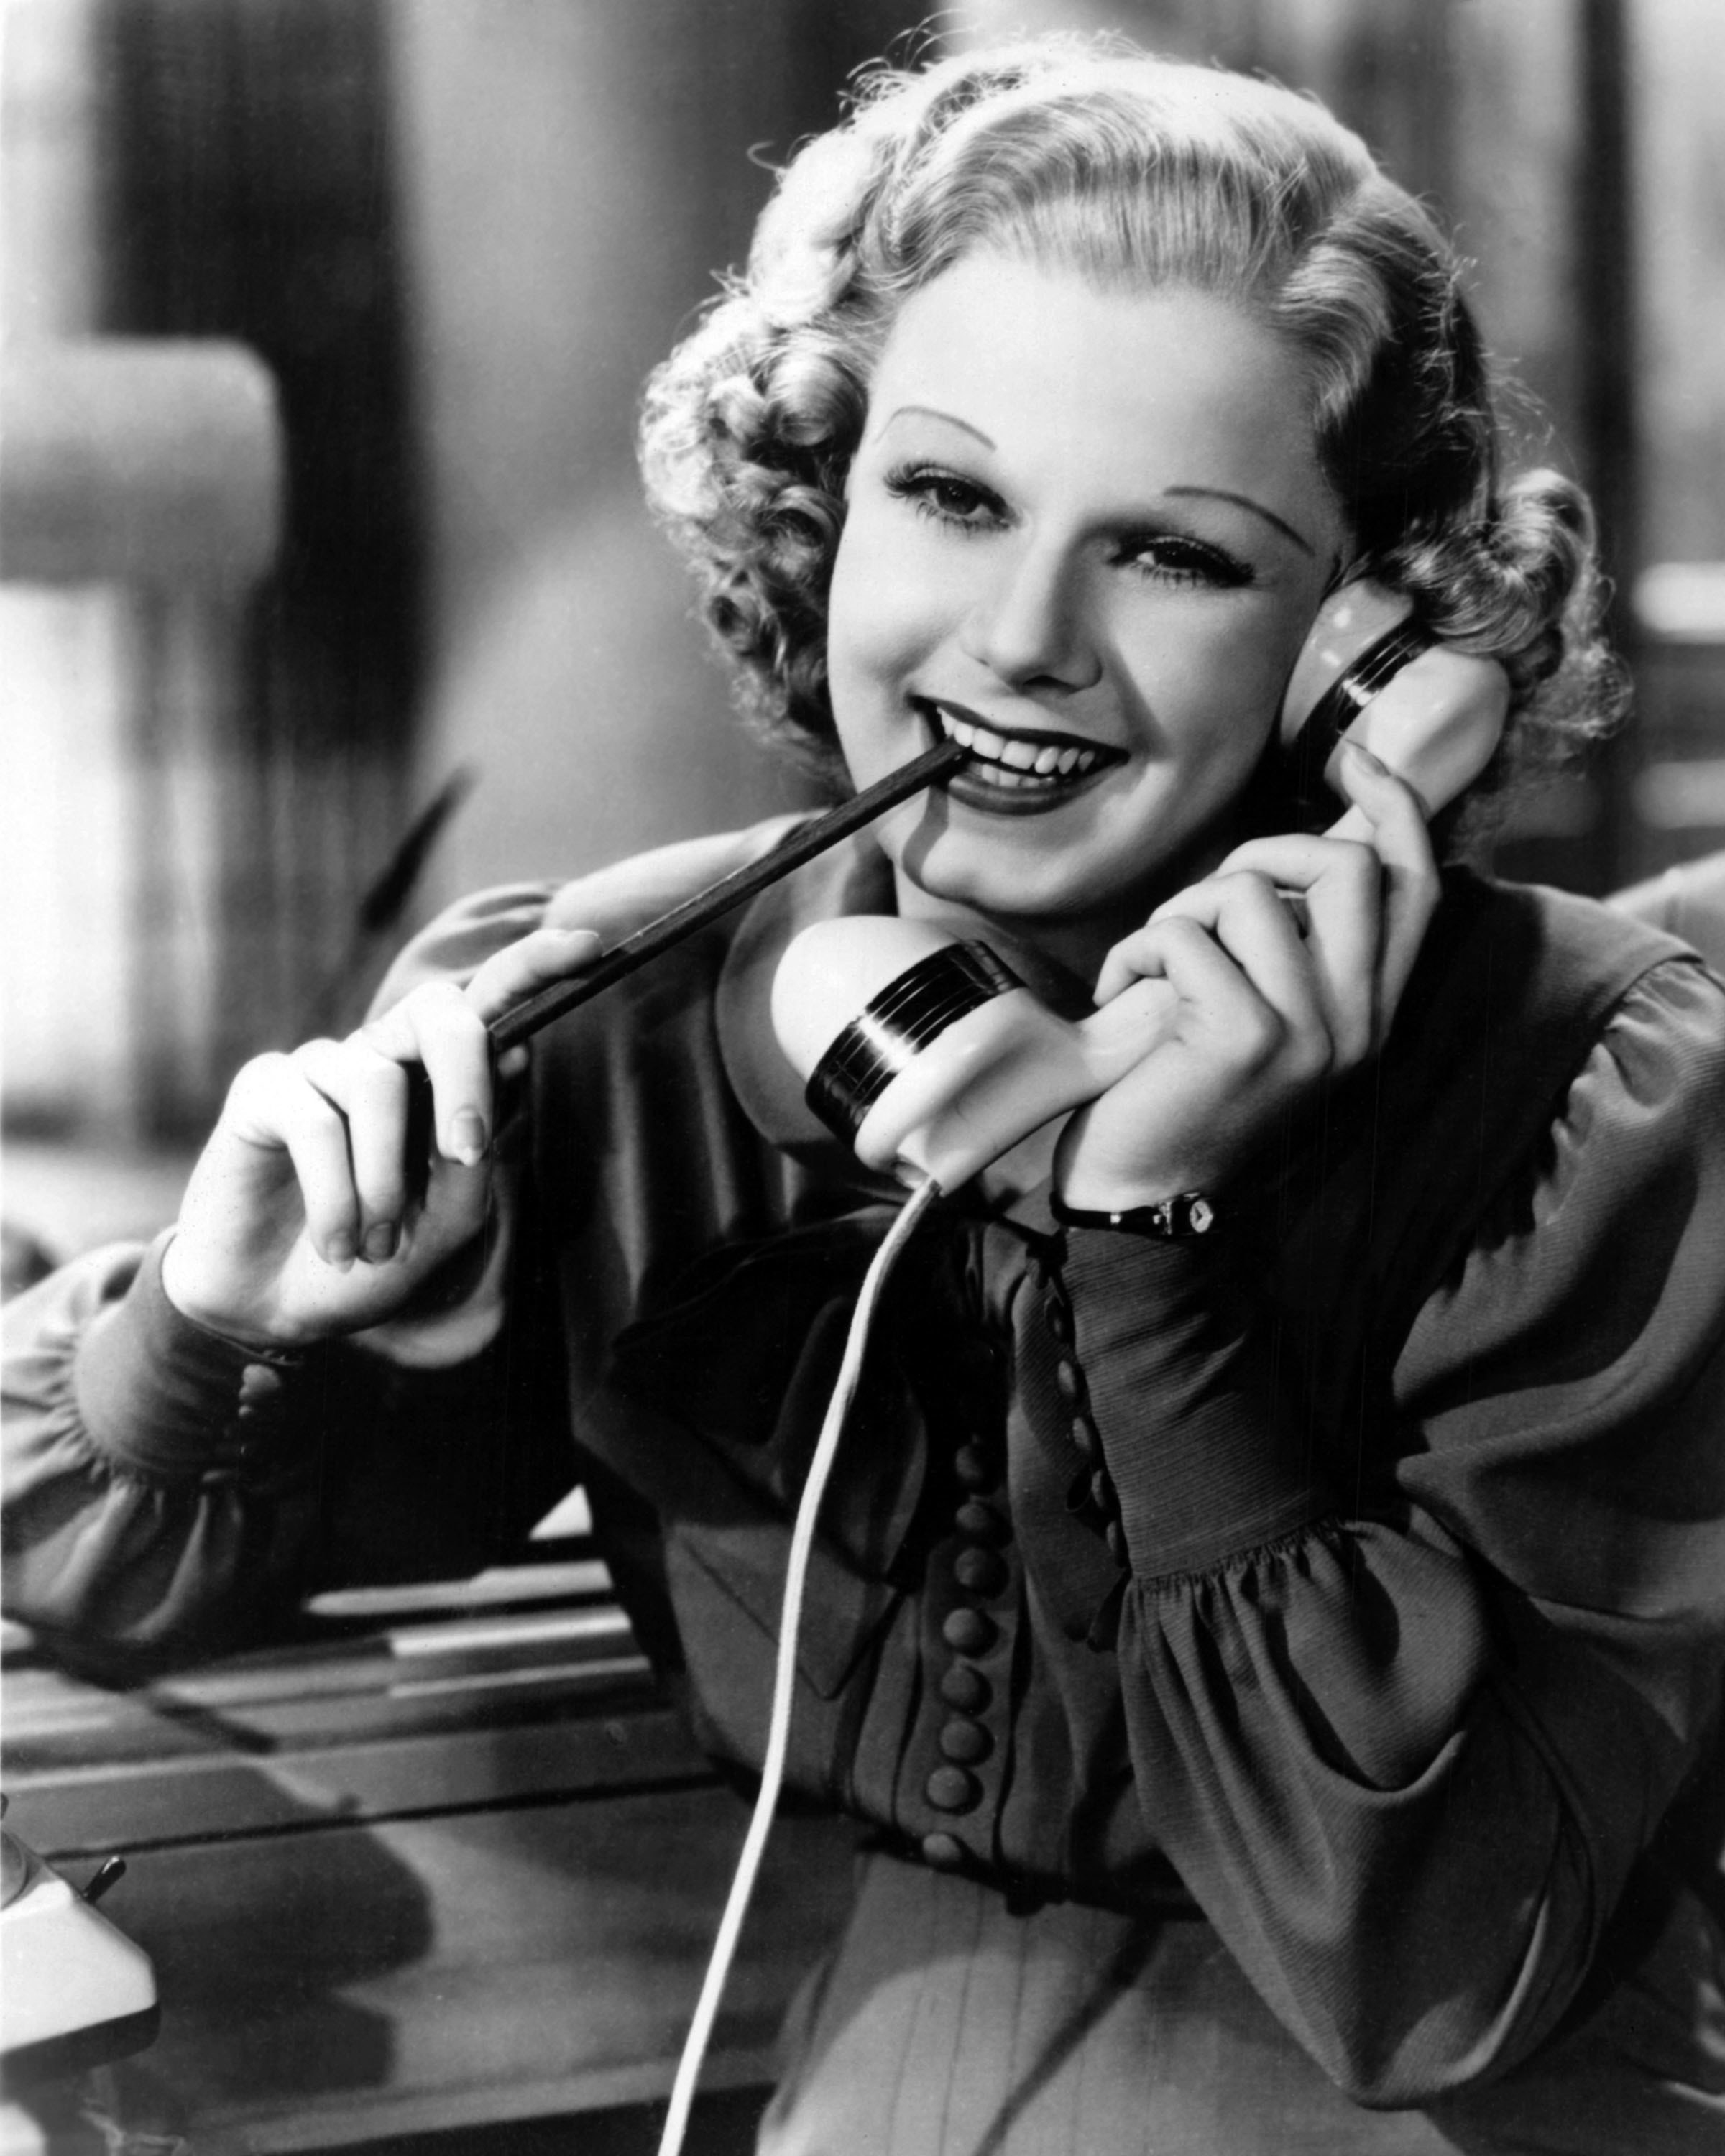 Harlow on a phone call in a film